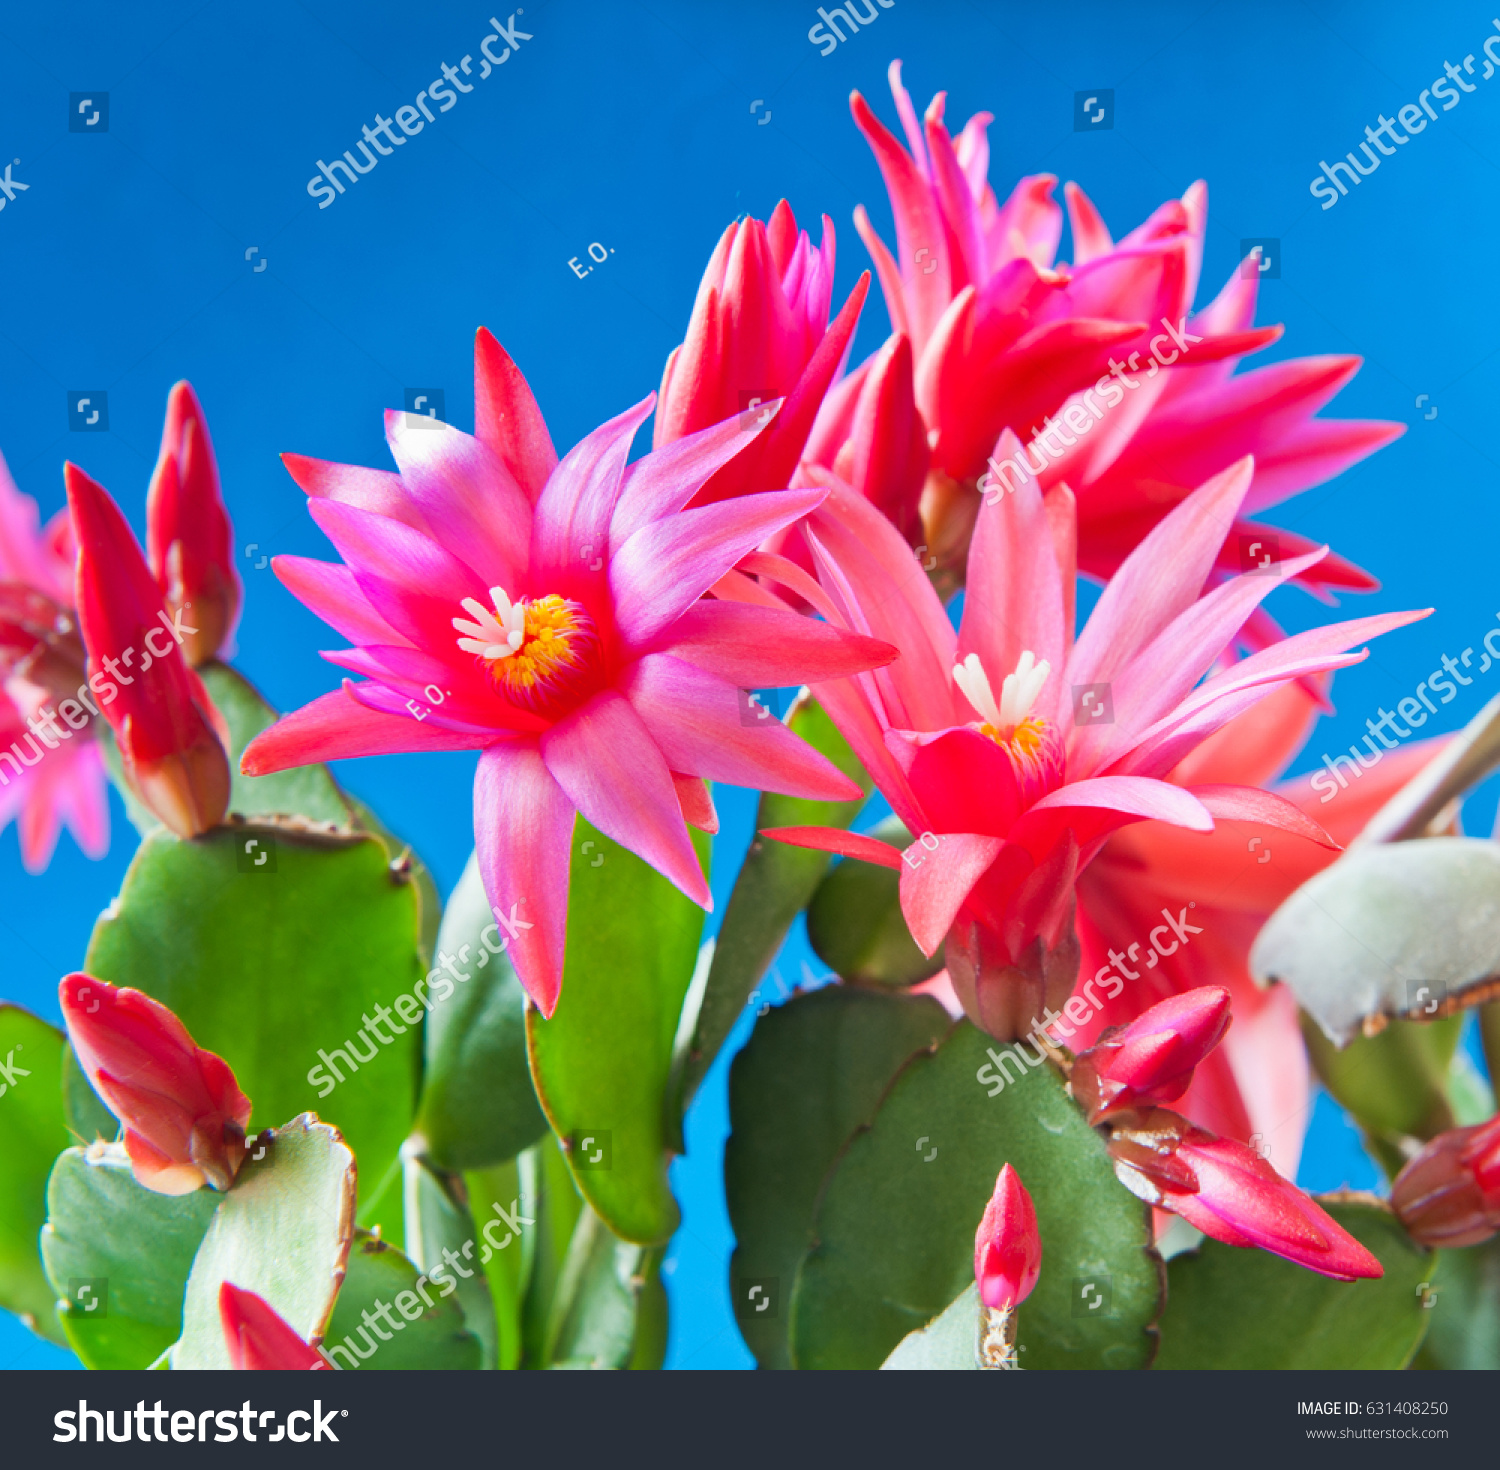 Red flowers of Schlumbergera against blue background #631408250